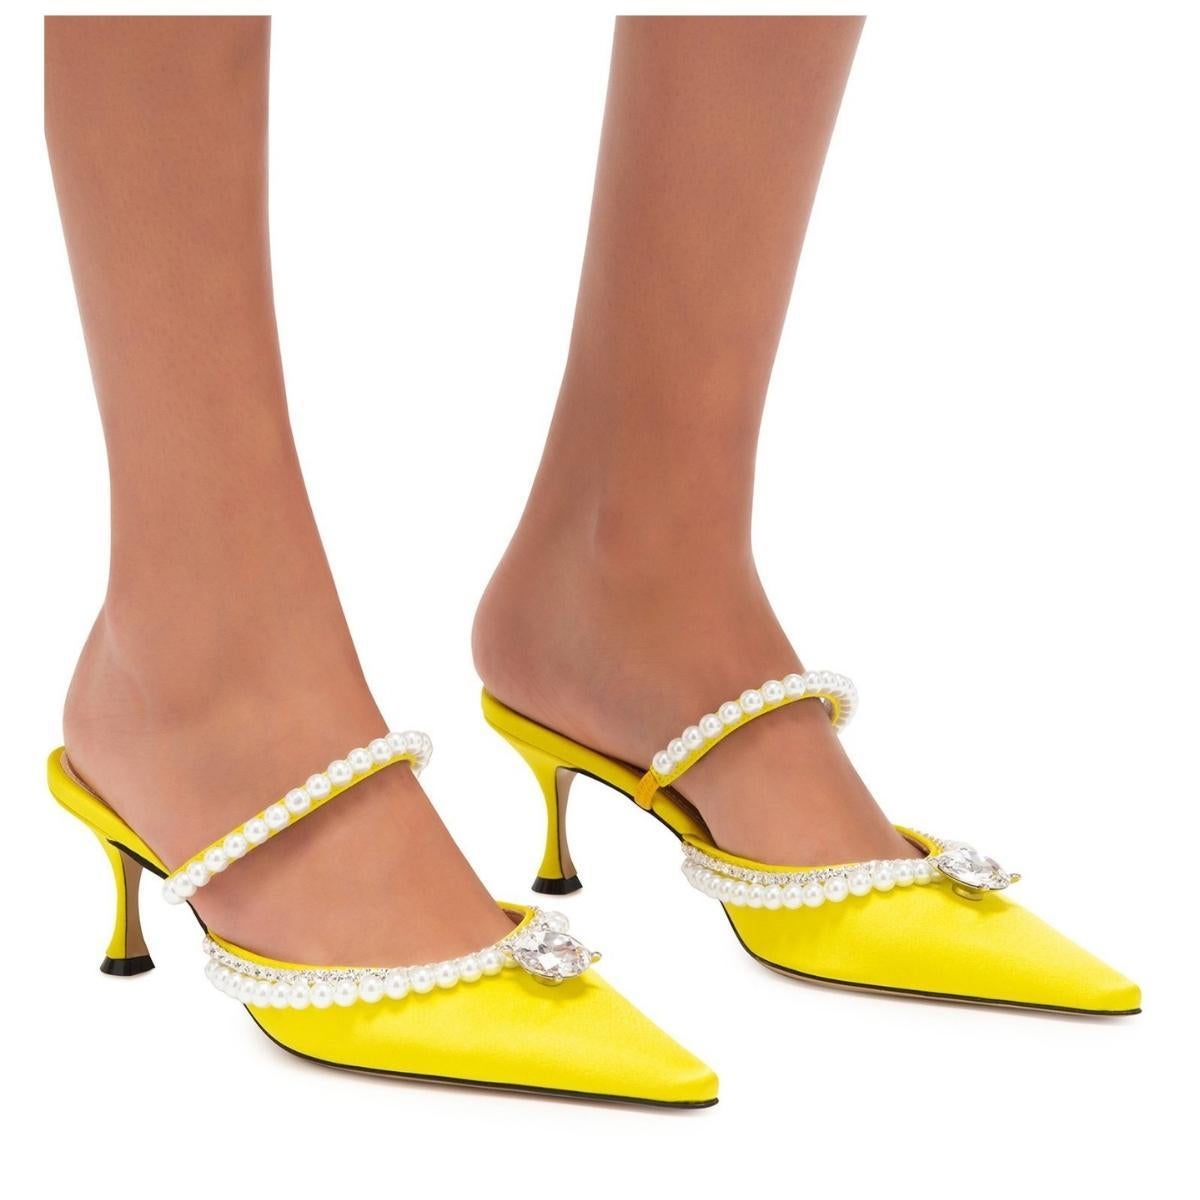 Silk satin heels in yellow. Faux-pearl and crystal-cut detailing at vamp.
Pointed toe
Grained leather footbed in beige
Covered kitten heel with rubber injection
Leather sole in beige
Heel: H2.5 in
Supplier color: Yellow
Upper: textile.
Sole: